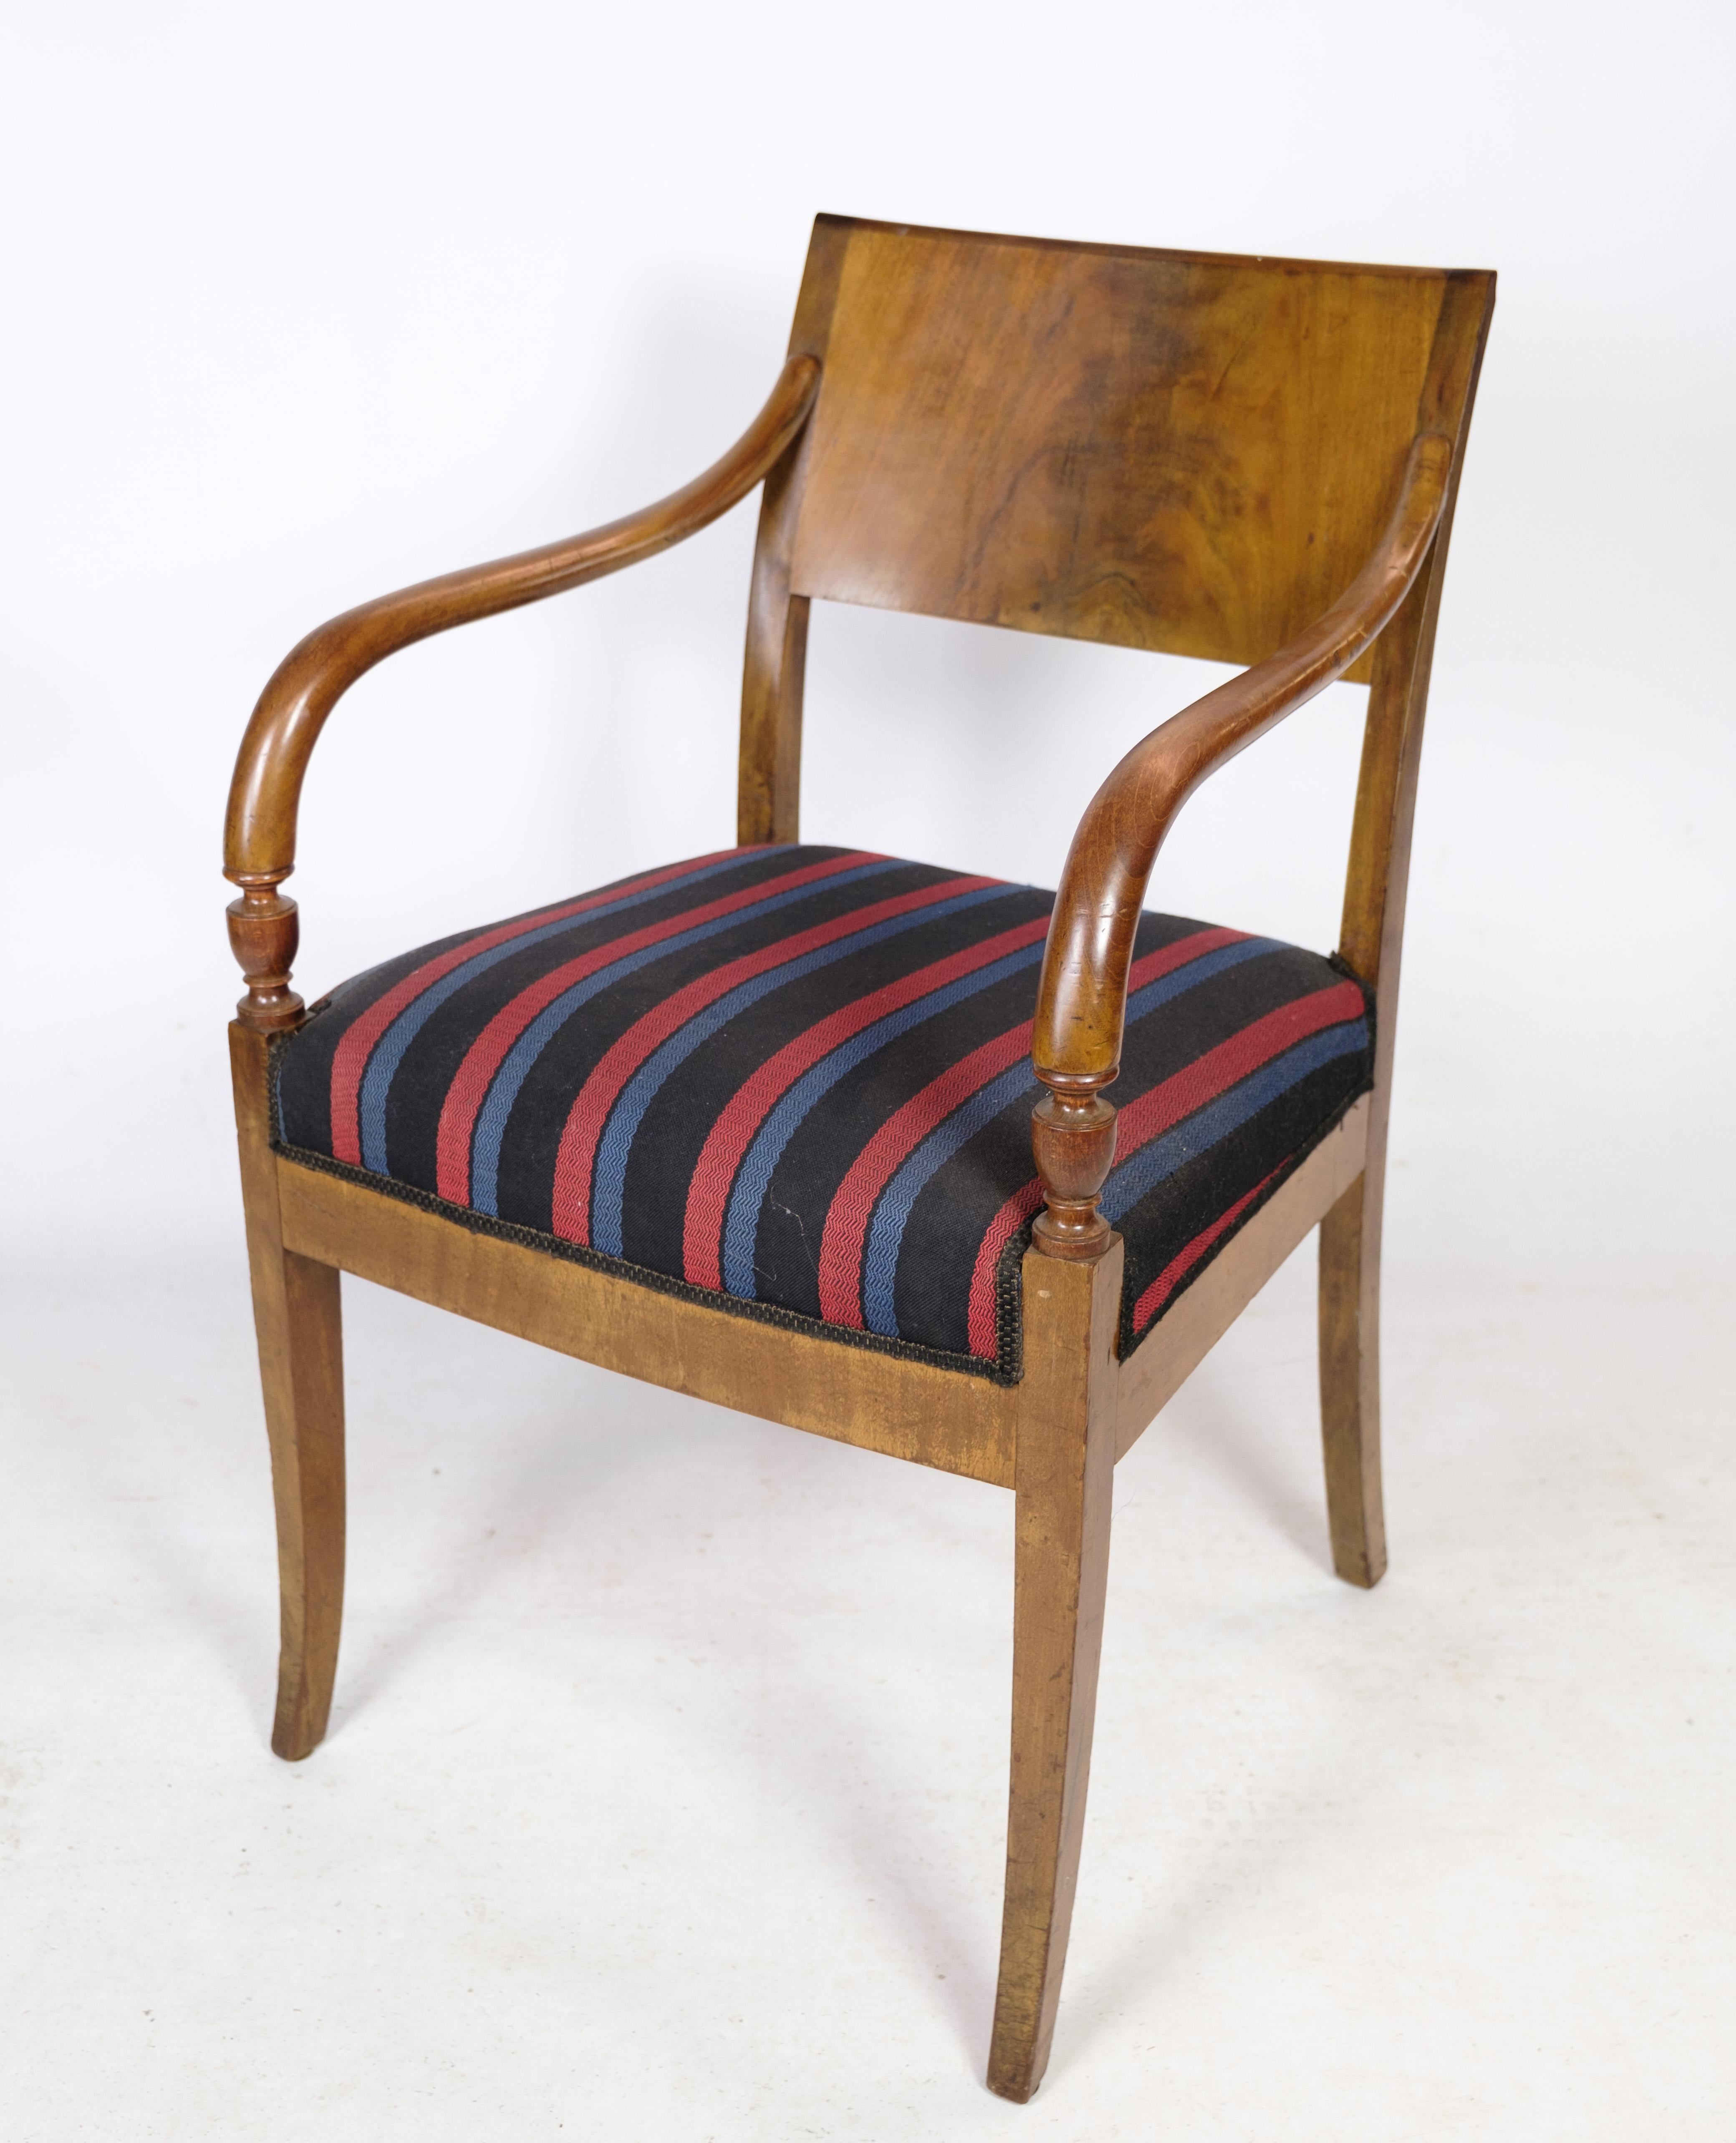 A pair of Danish Empire style hand-polished mahogany armchairs with striped fabric from around the 1920s.
Measurements in cm: H:84 W:52 D:47 SH:50

This product will be inspected thoroughly at our professional workshop by our educated employees,